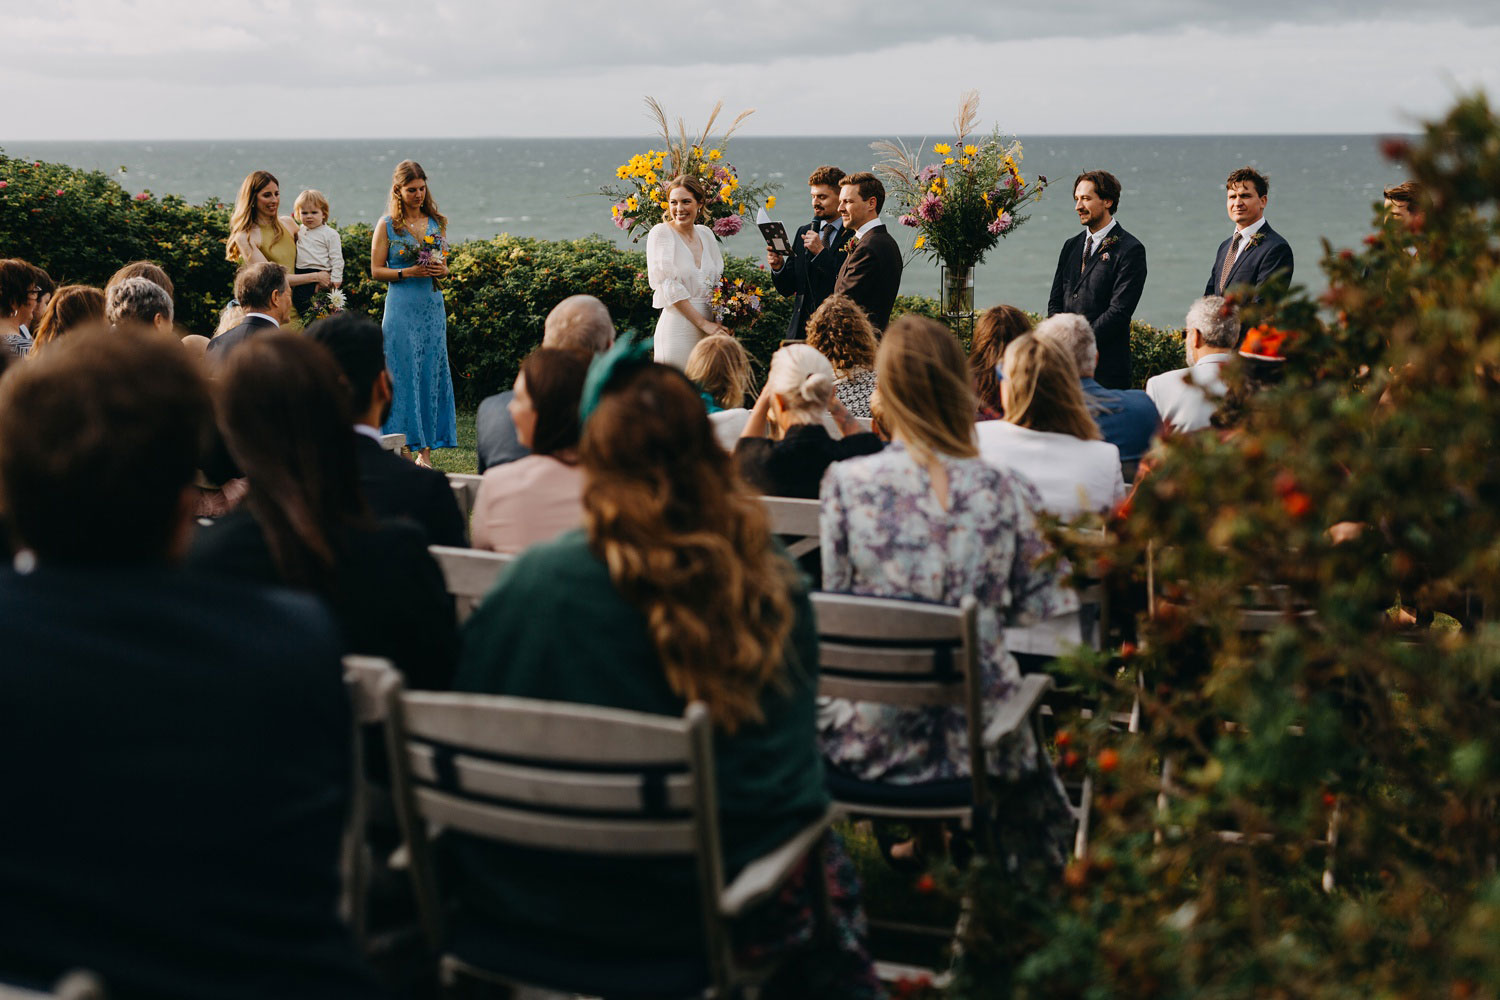 A dreamy setting for love: the couple ties the knot in an open-air ceremony filled with joy and natural beauty at Helenekilde Badehotel